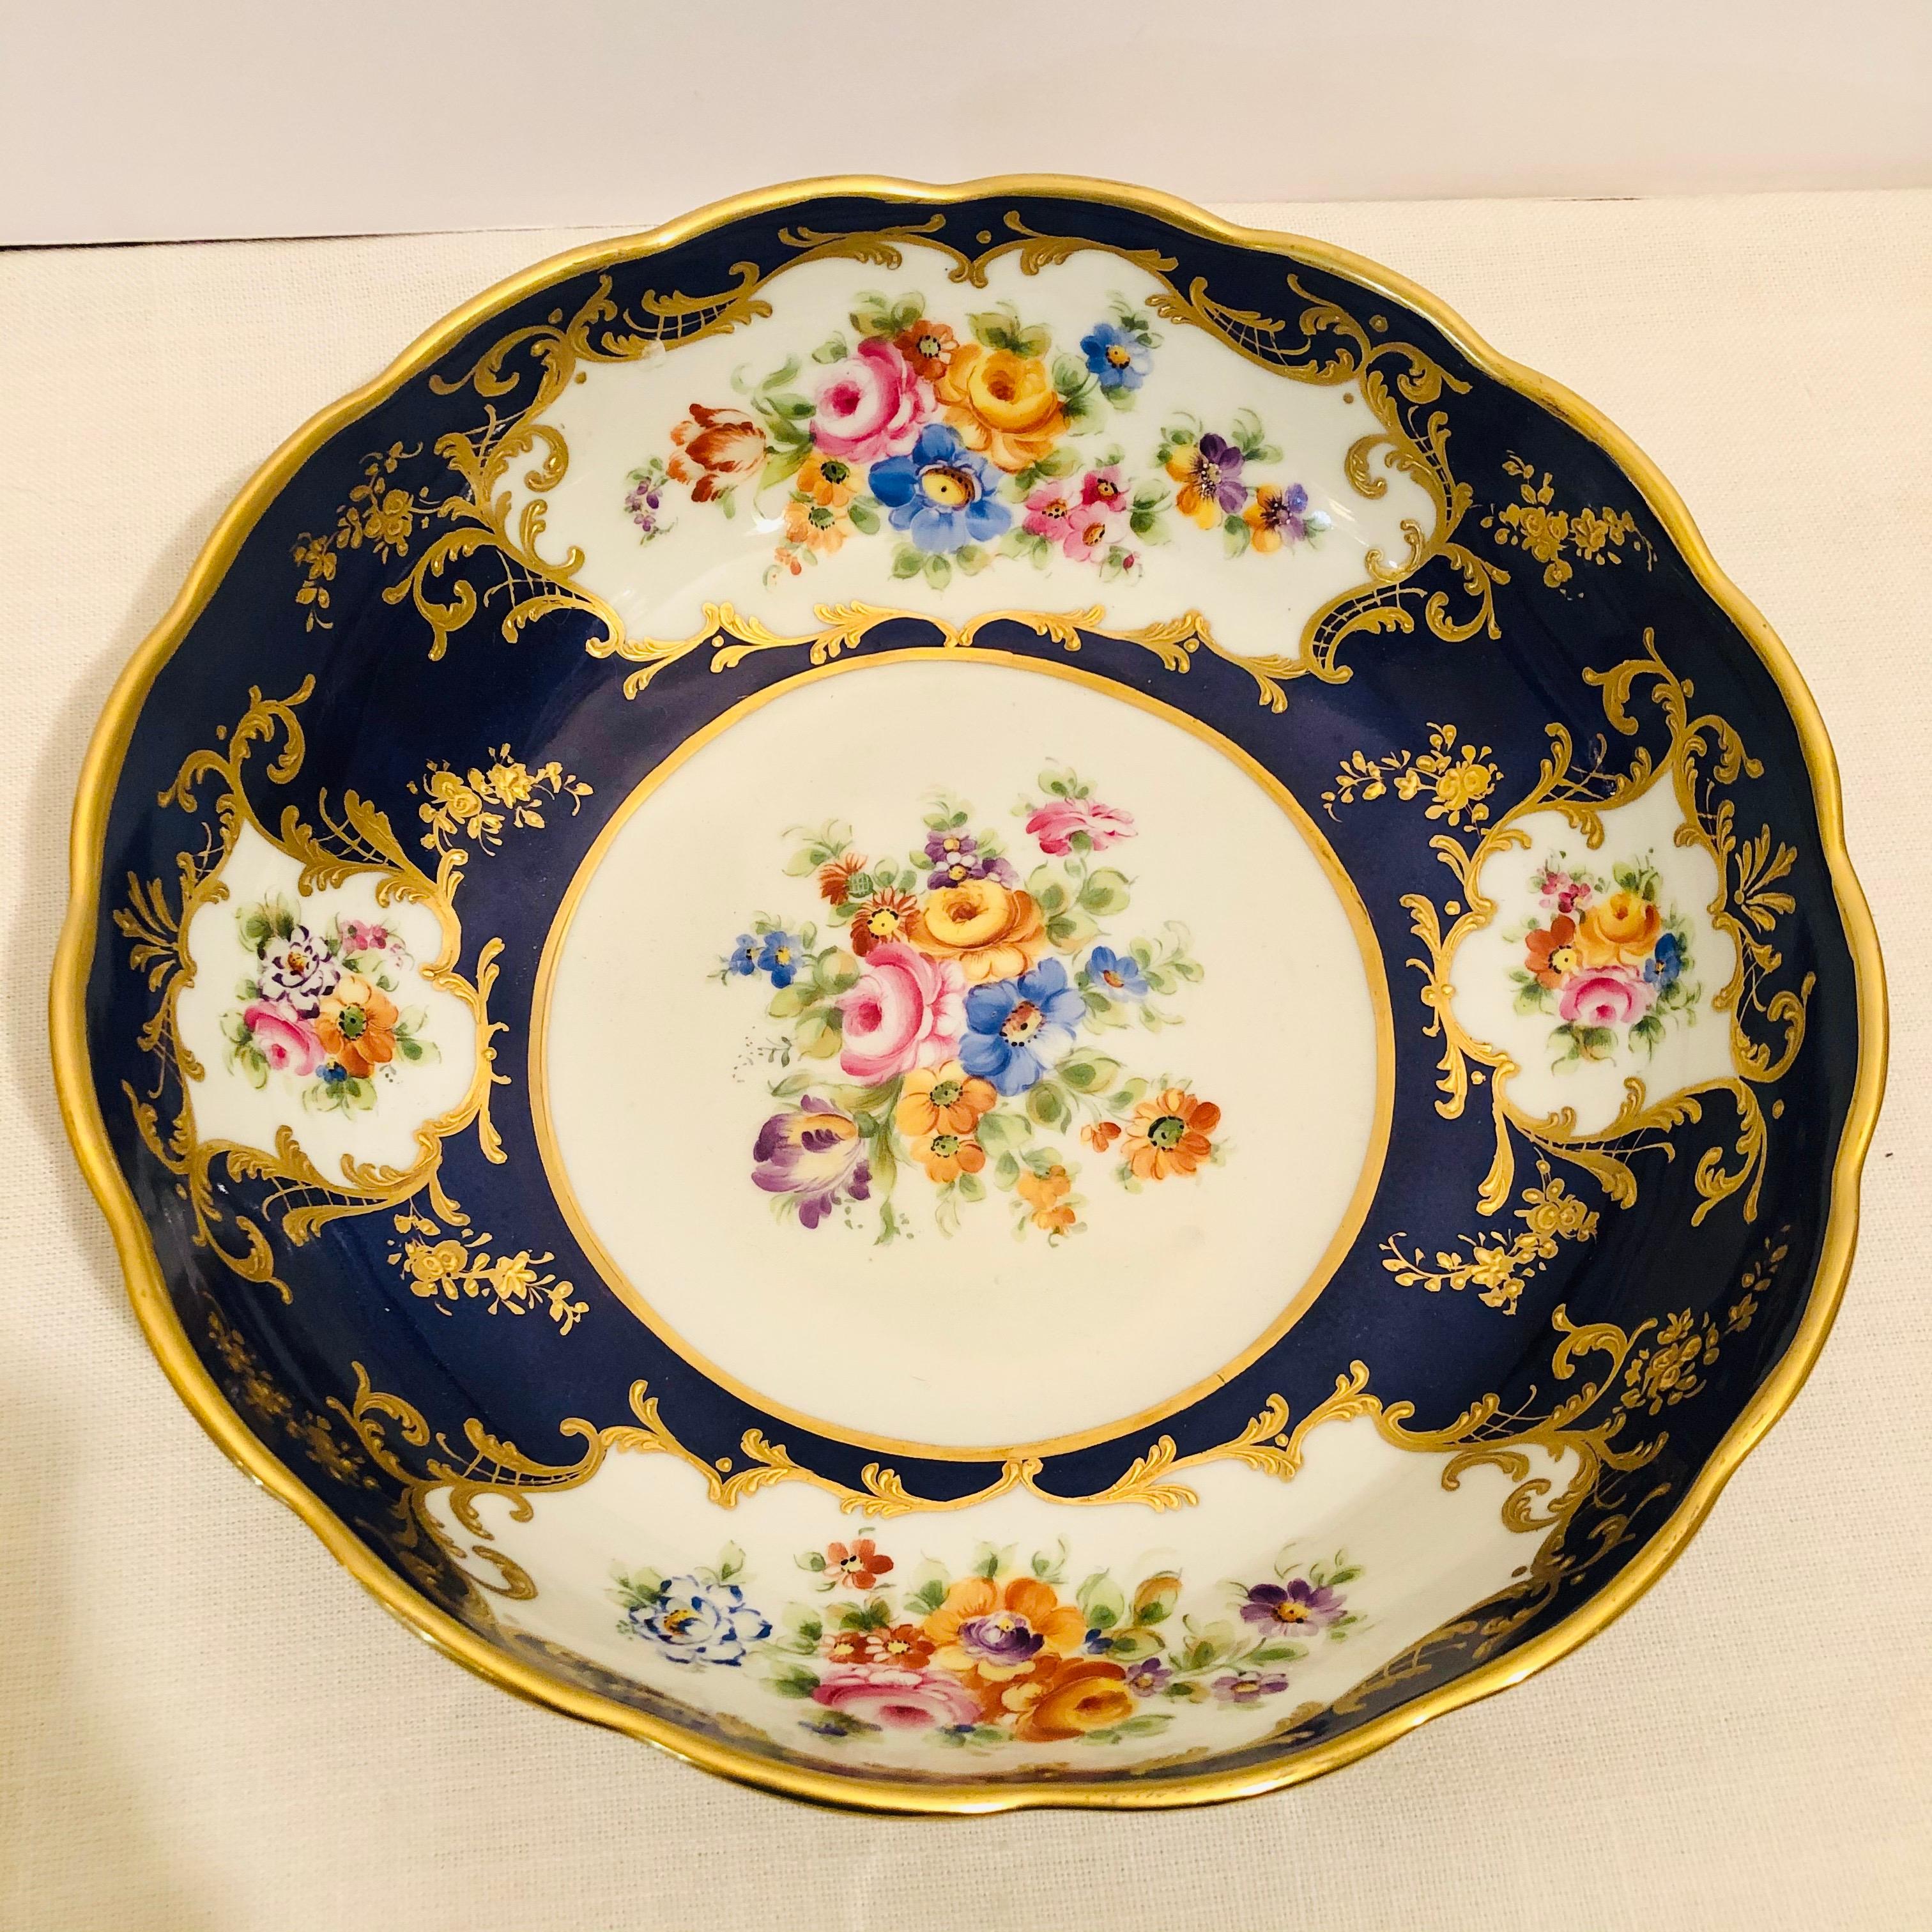 Porcelain Le Tallec Blue Bowl with Painted Central Flower Bouquet and 4 Flower Medallions